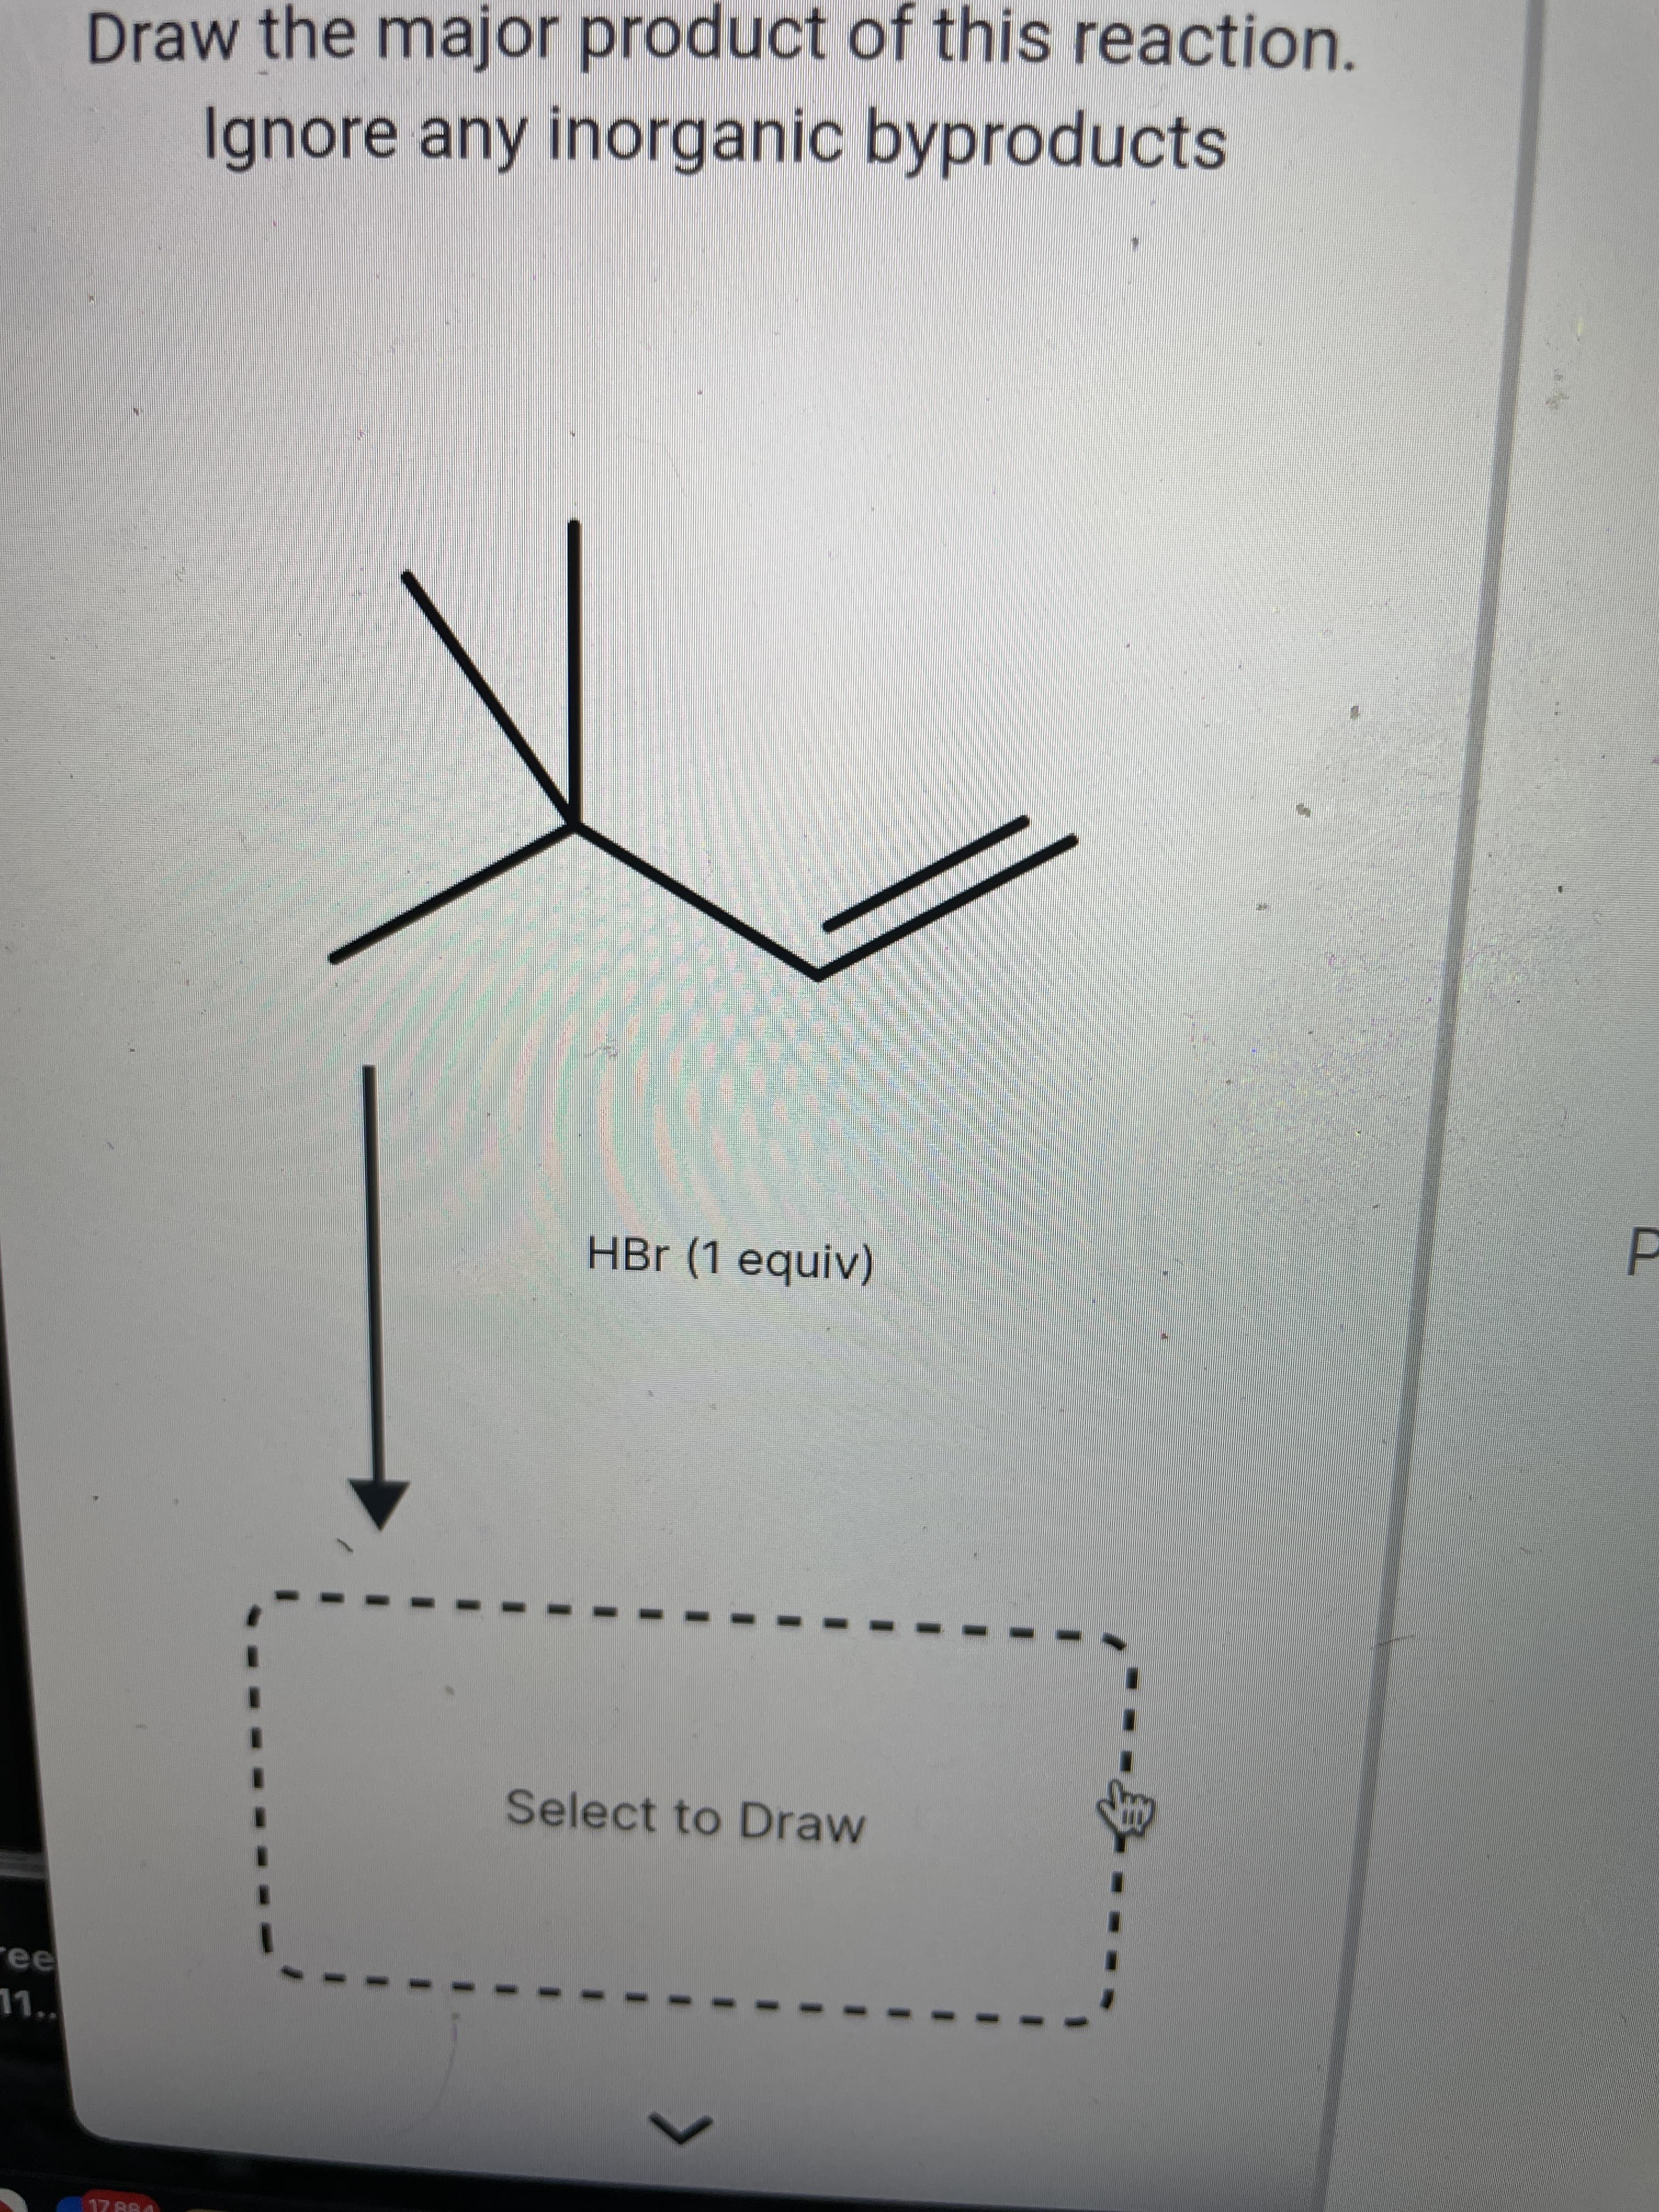 Draw the major product of this reaction.
Ignore any inorganic byproducts
HBr (1 equiv)
Select to Draw
ree
LL
17.664
